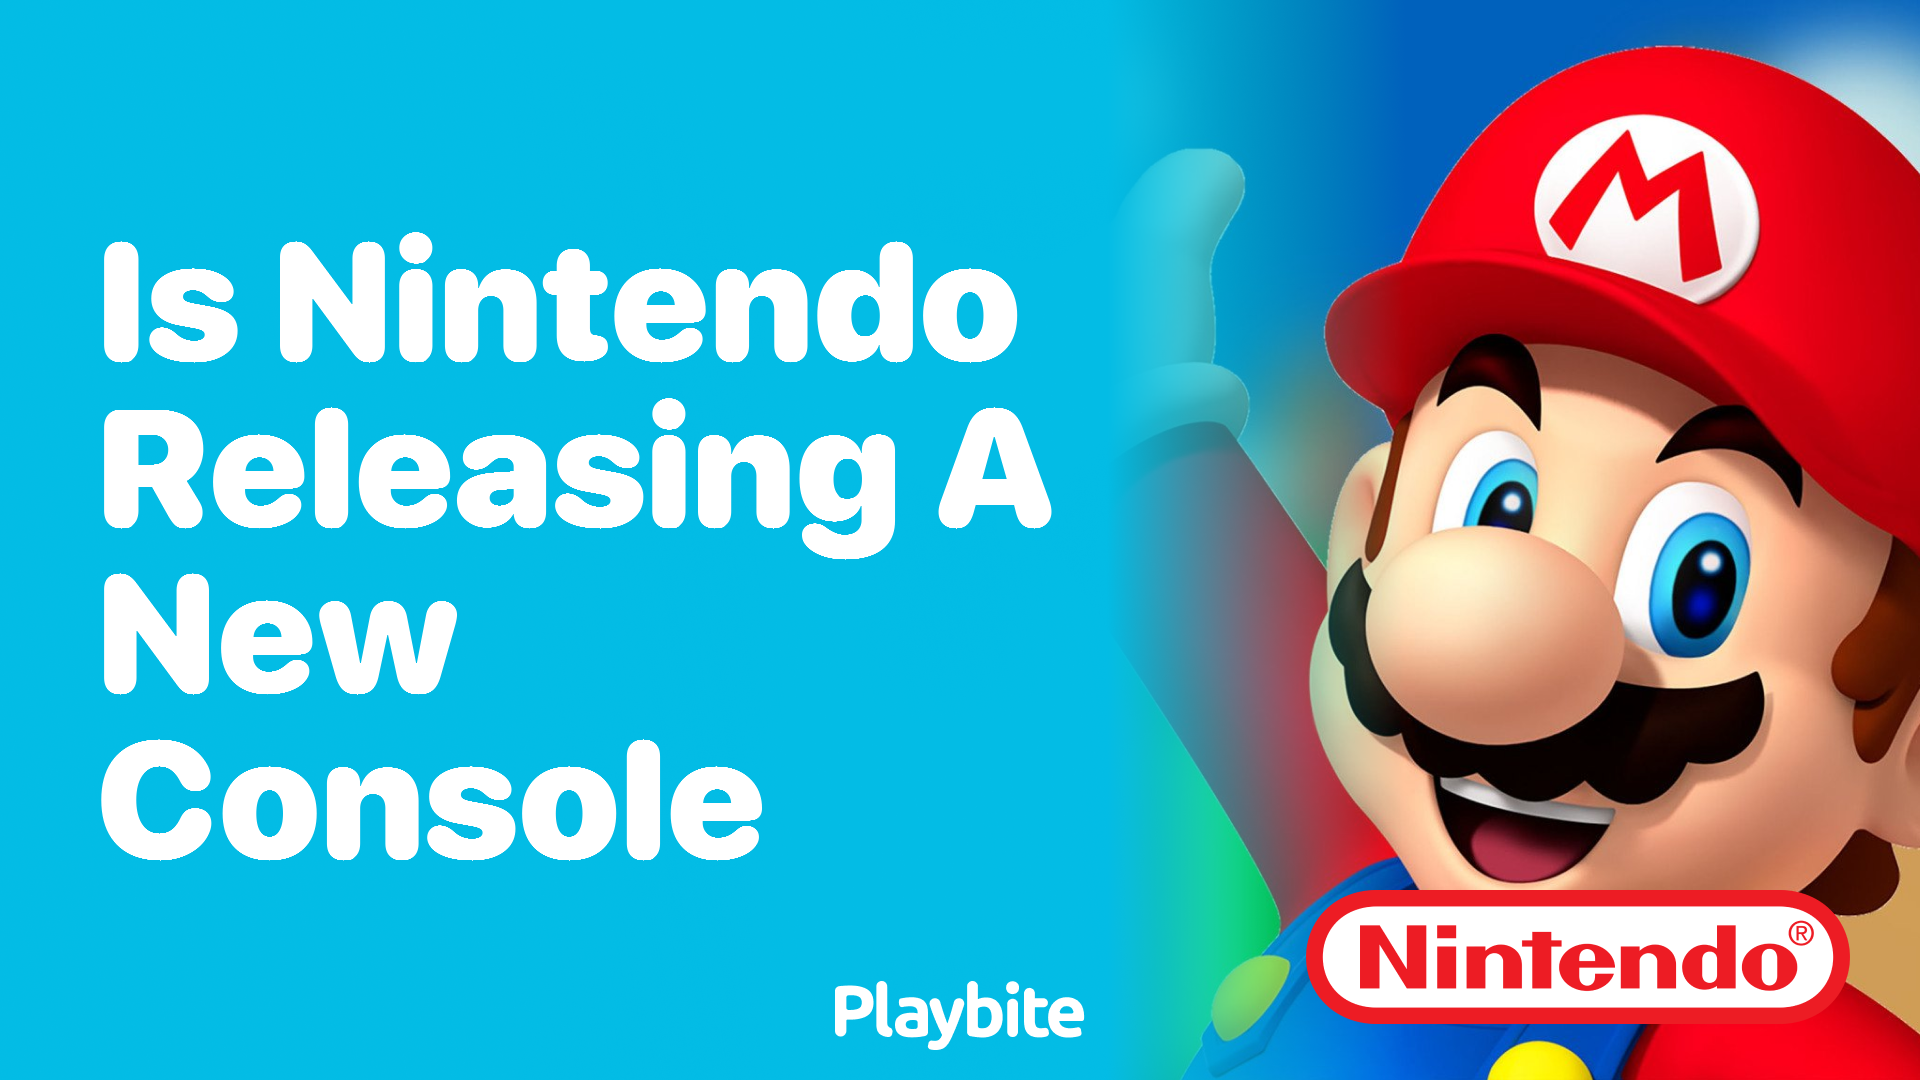 Is Nintendo Releasing a New Console?